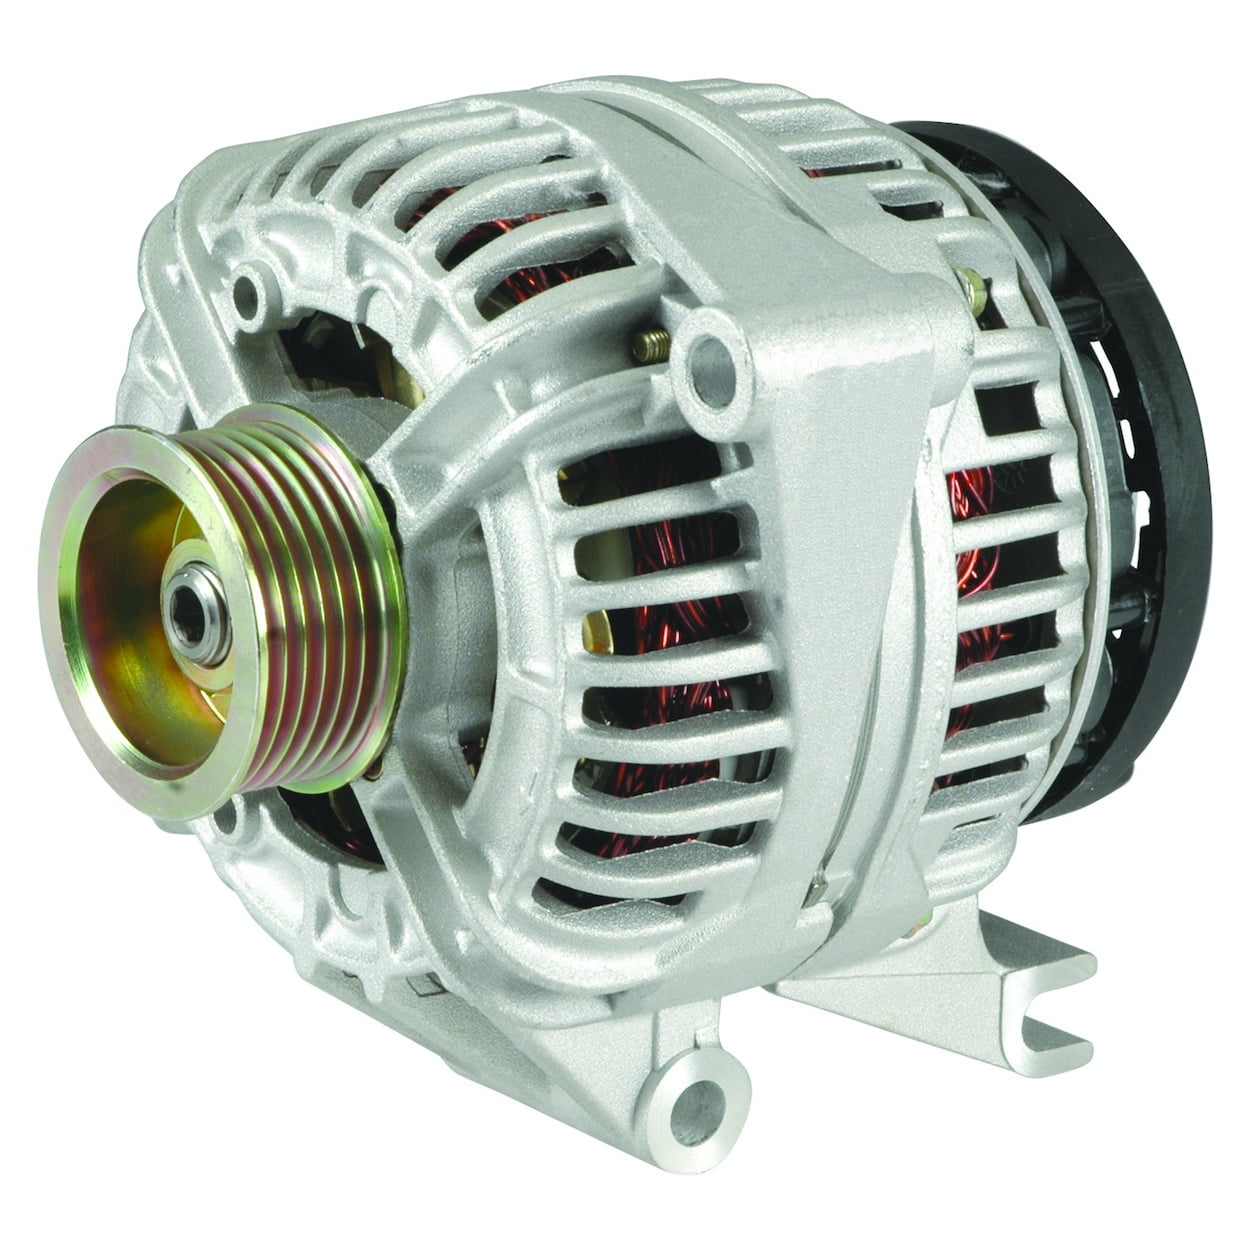 New Alternator Replacement For Buick Century Chevy Impala & Monte Carlo 3.1 3.4 V6 2002-2004